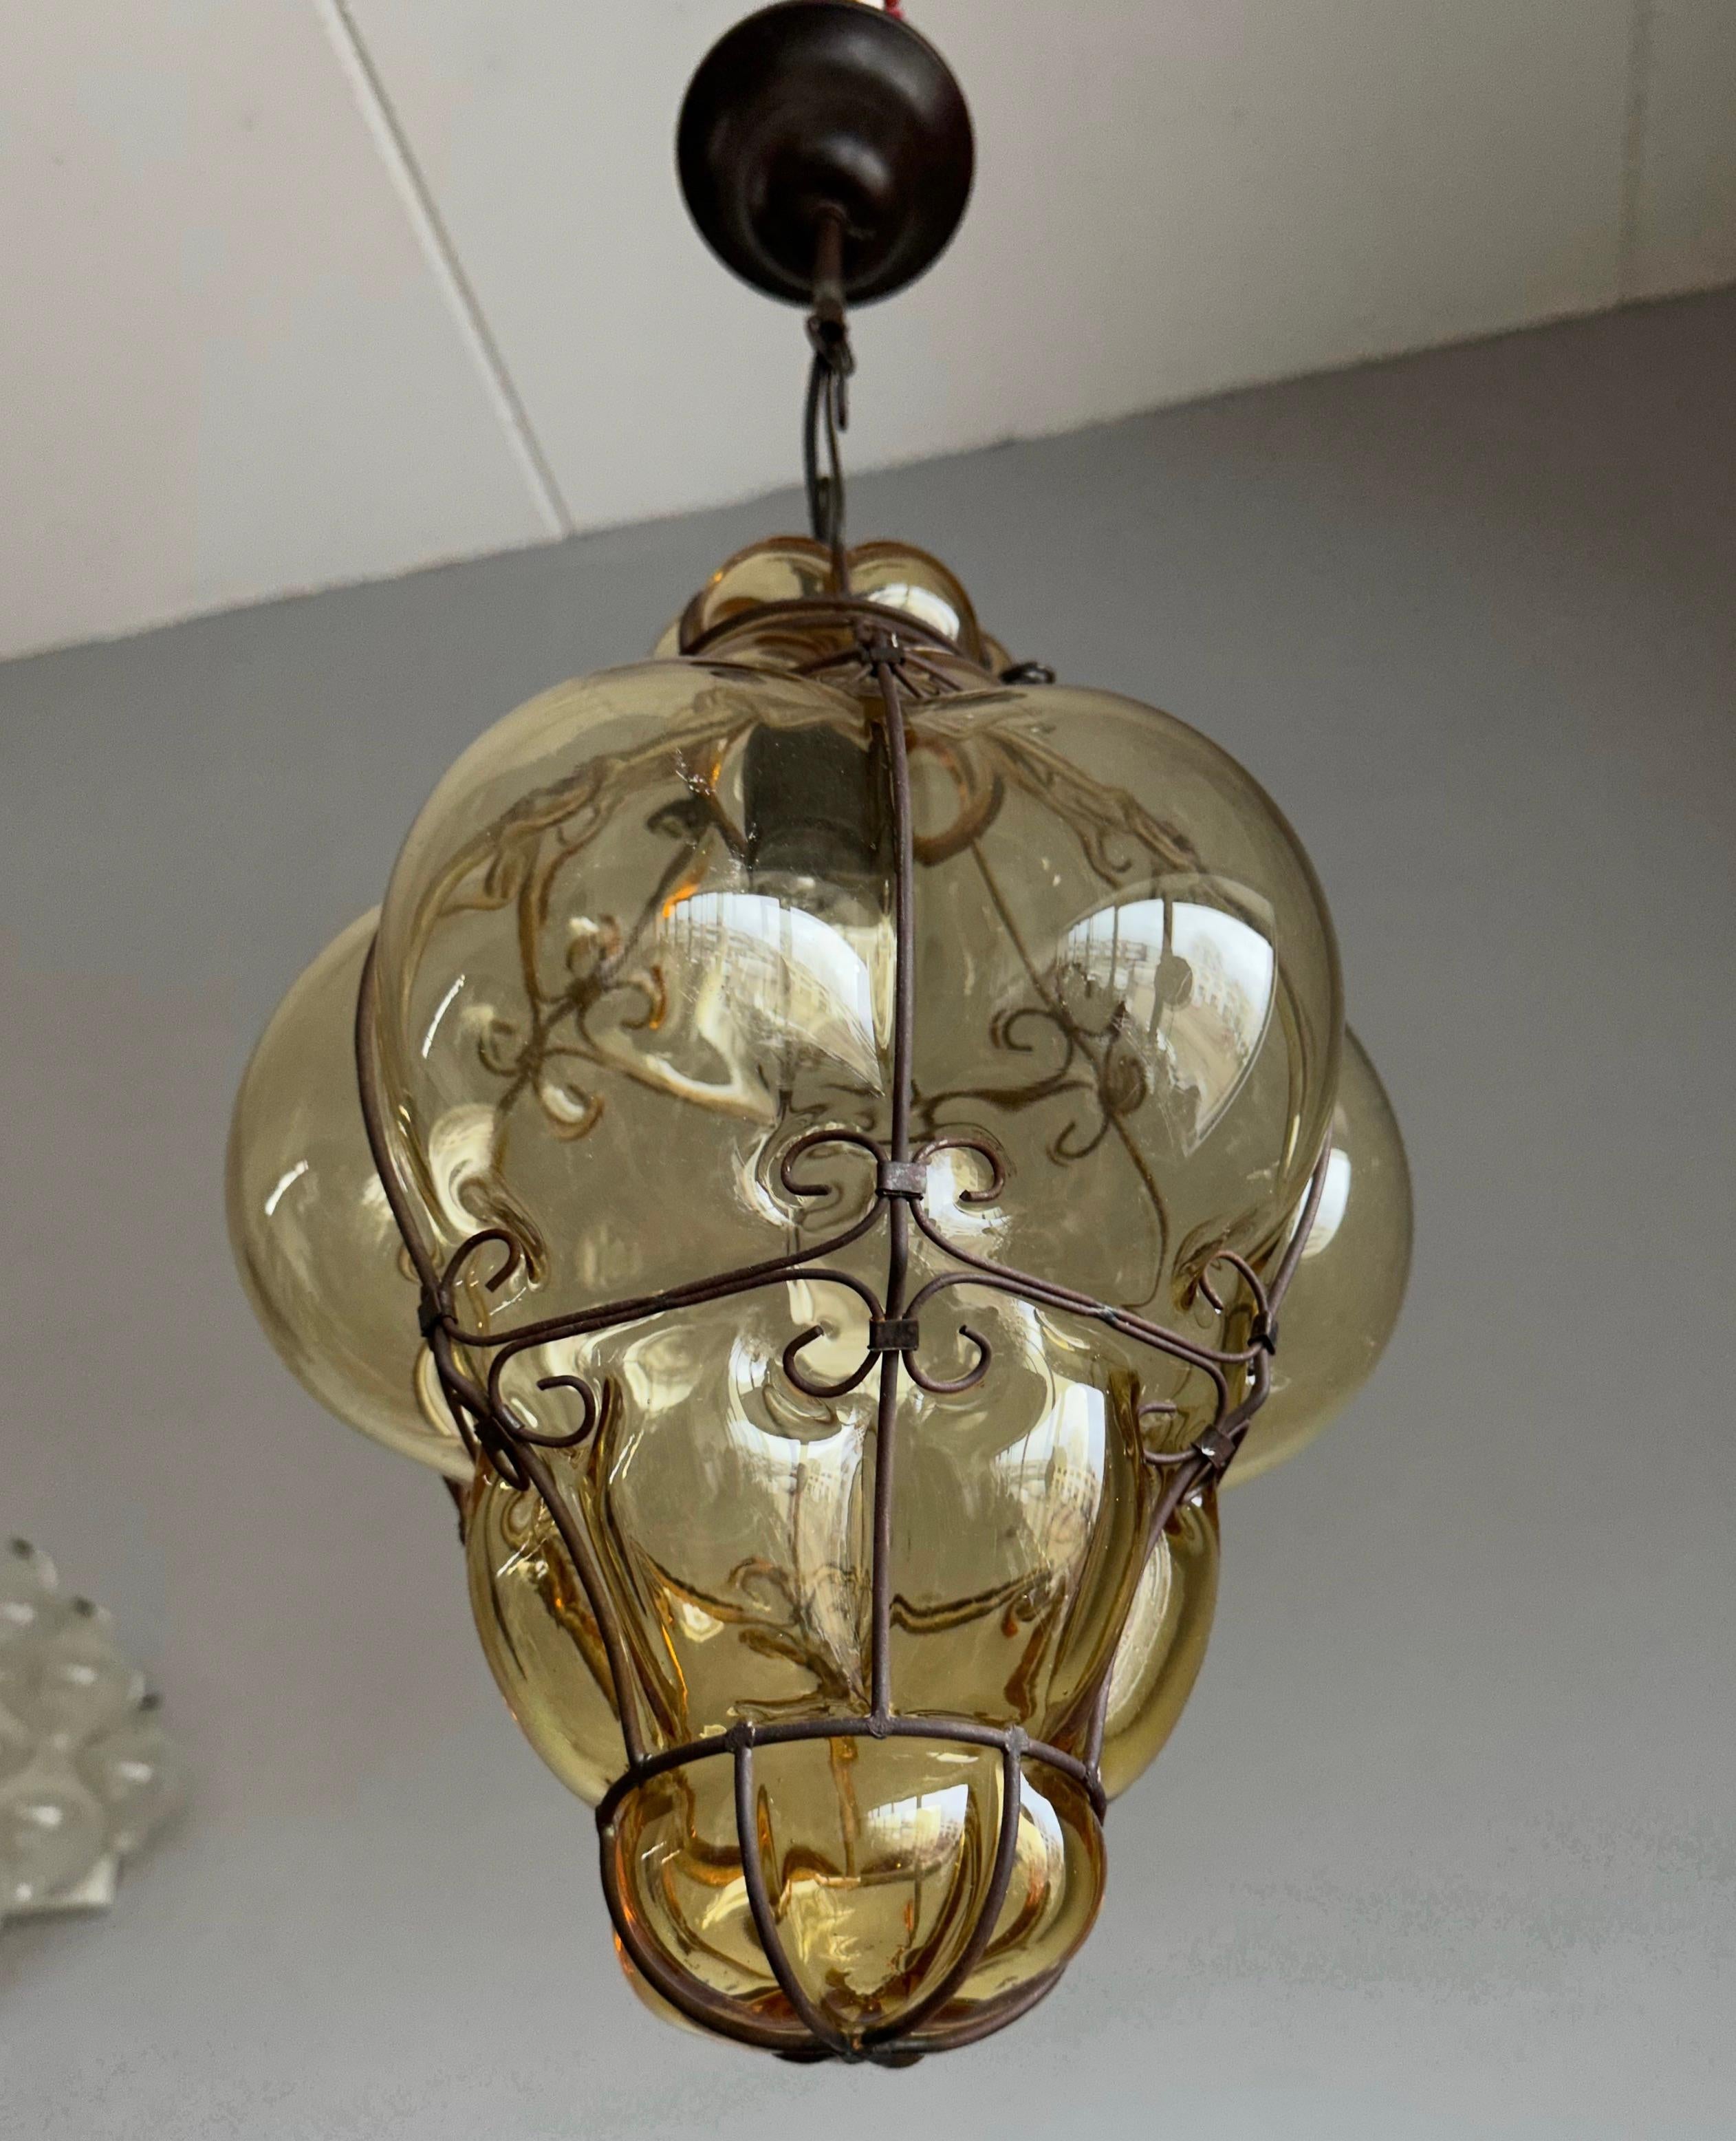 Beautiful color and good size vintage Italian murano fixture with mouthblown glass in a blackened thread metal frame. 

If you are looking for a stylish design, near-antique light to grace your home then this handmade specimen from the 1930s could